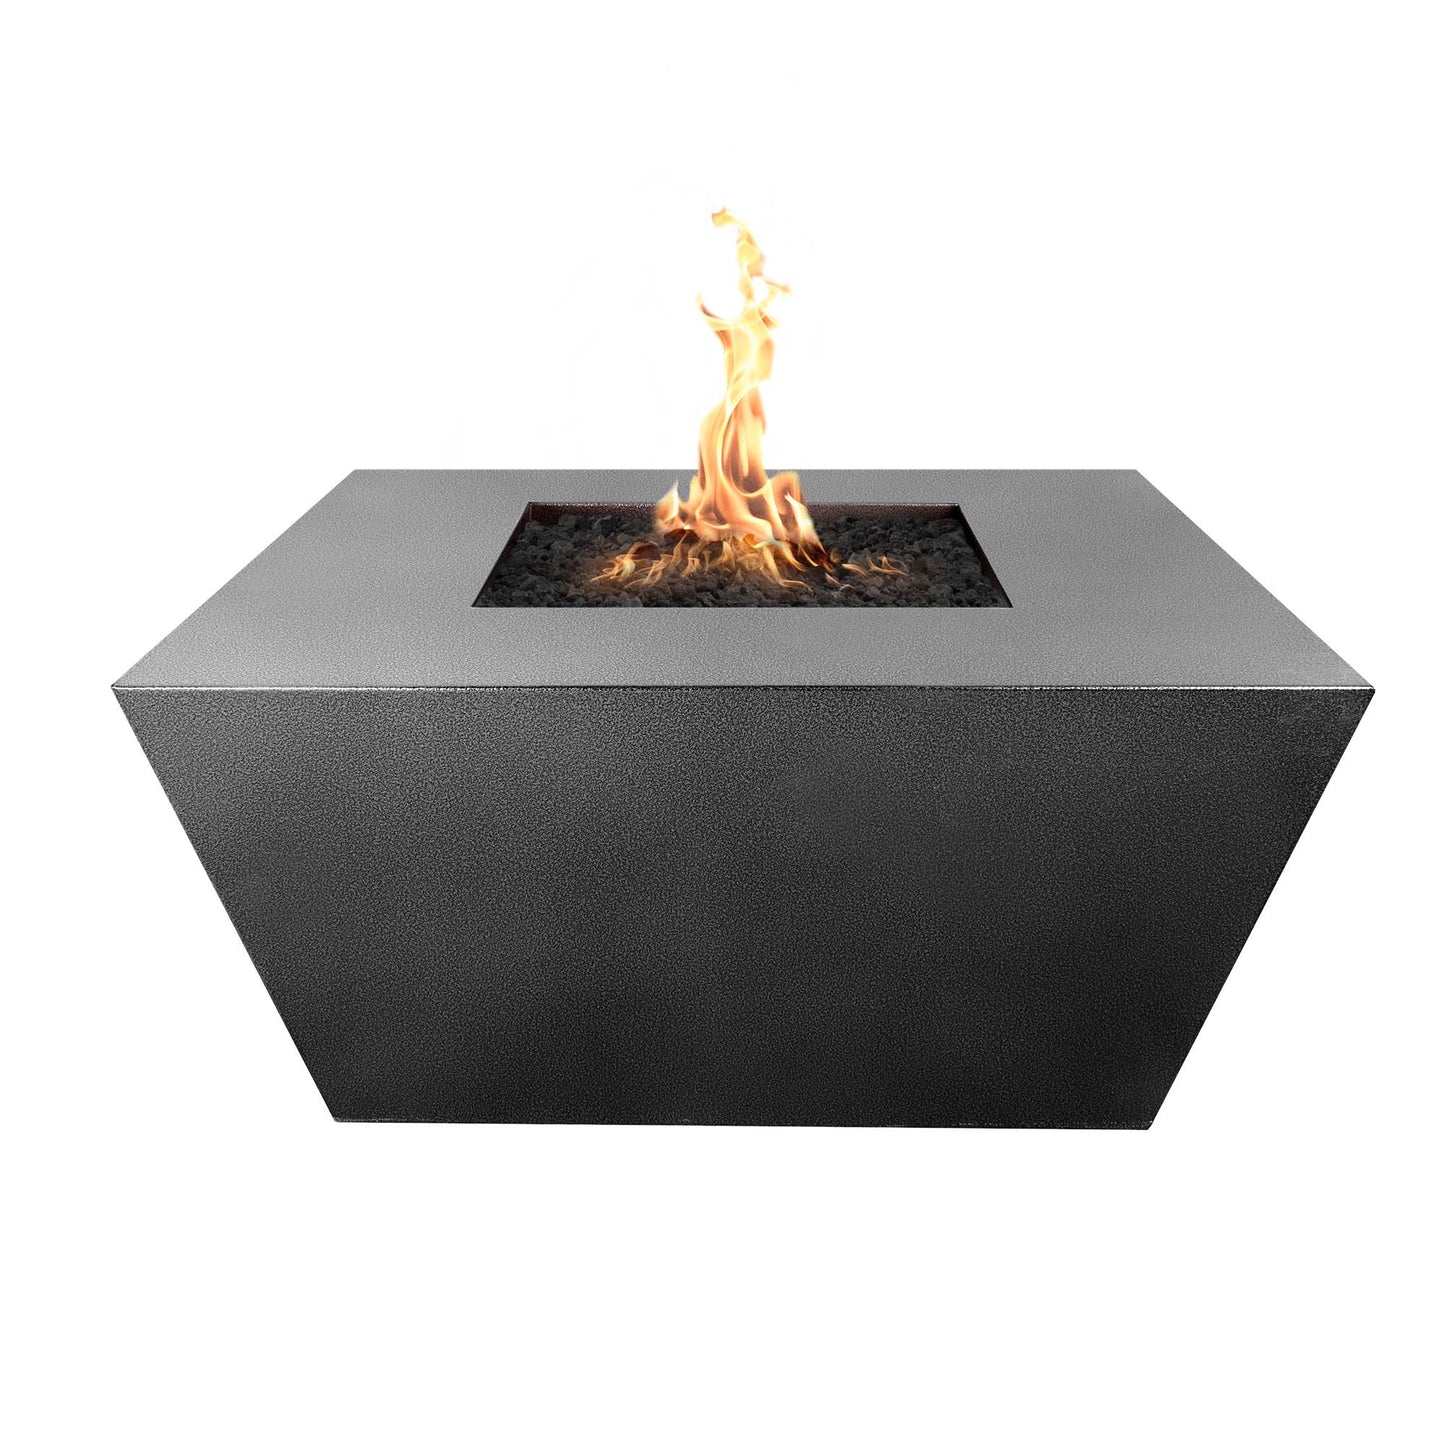 The Outdoor Plus Square Redan 36" Stainless Steel Natural Gas Fire Pit with 110V Electronic Ignition